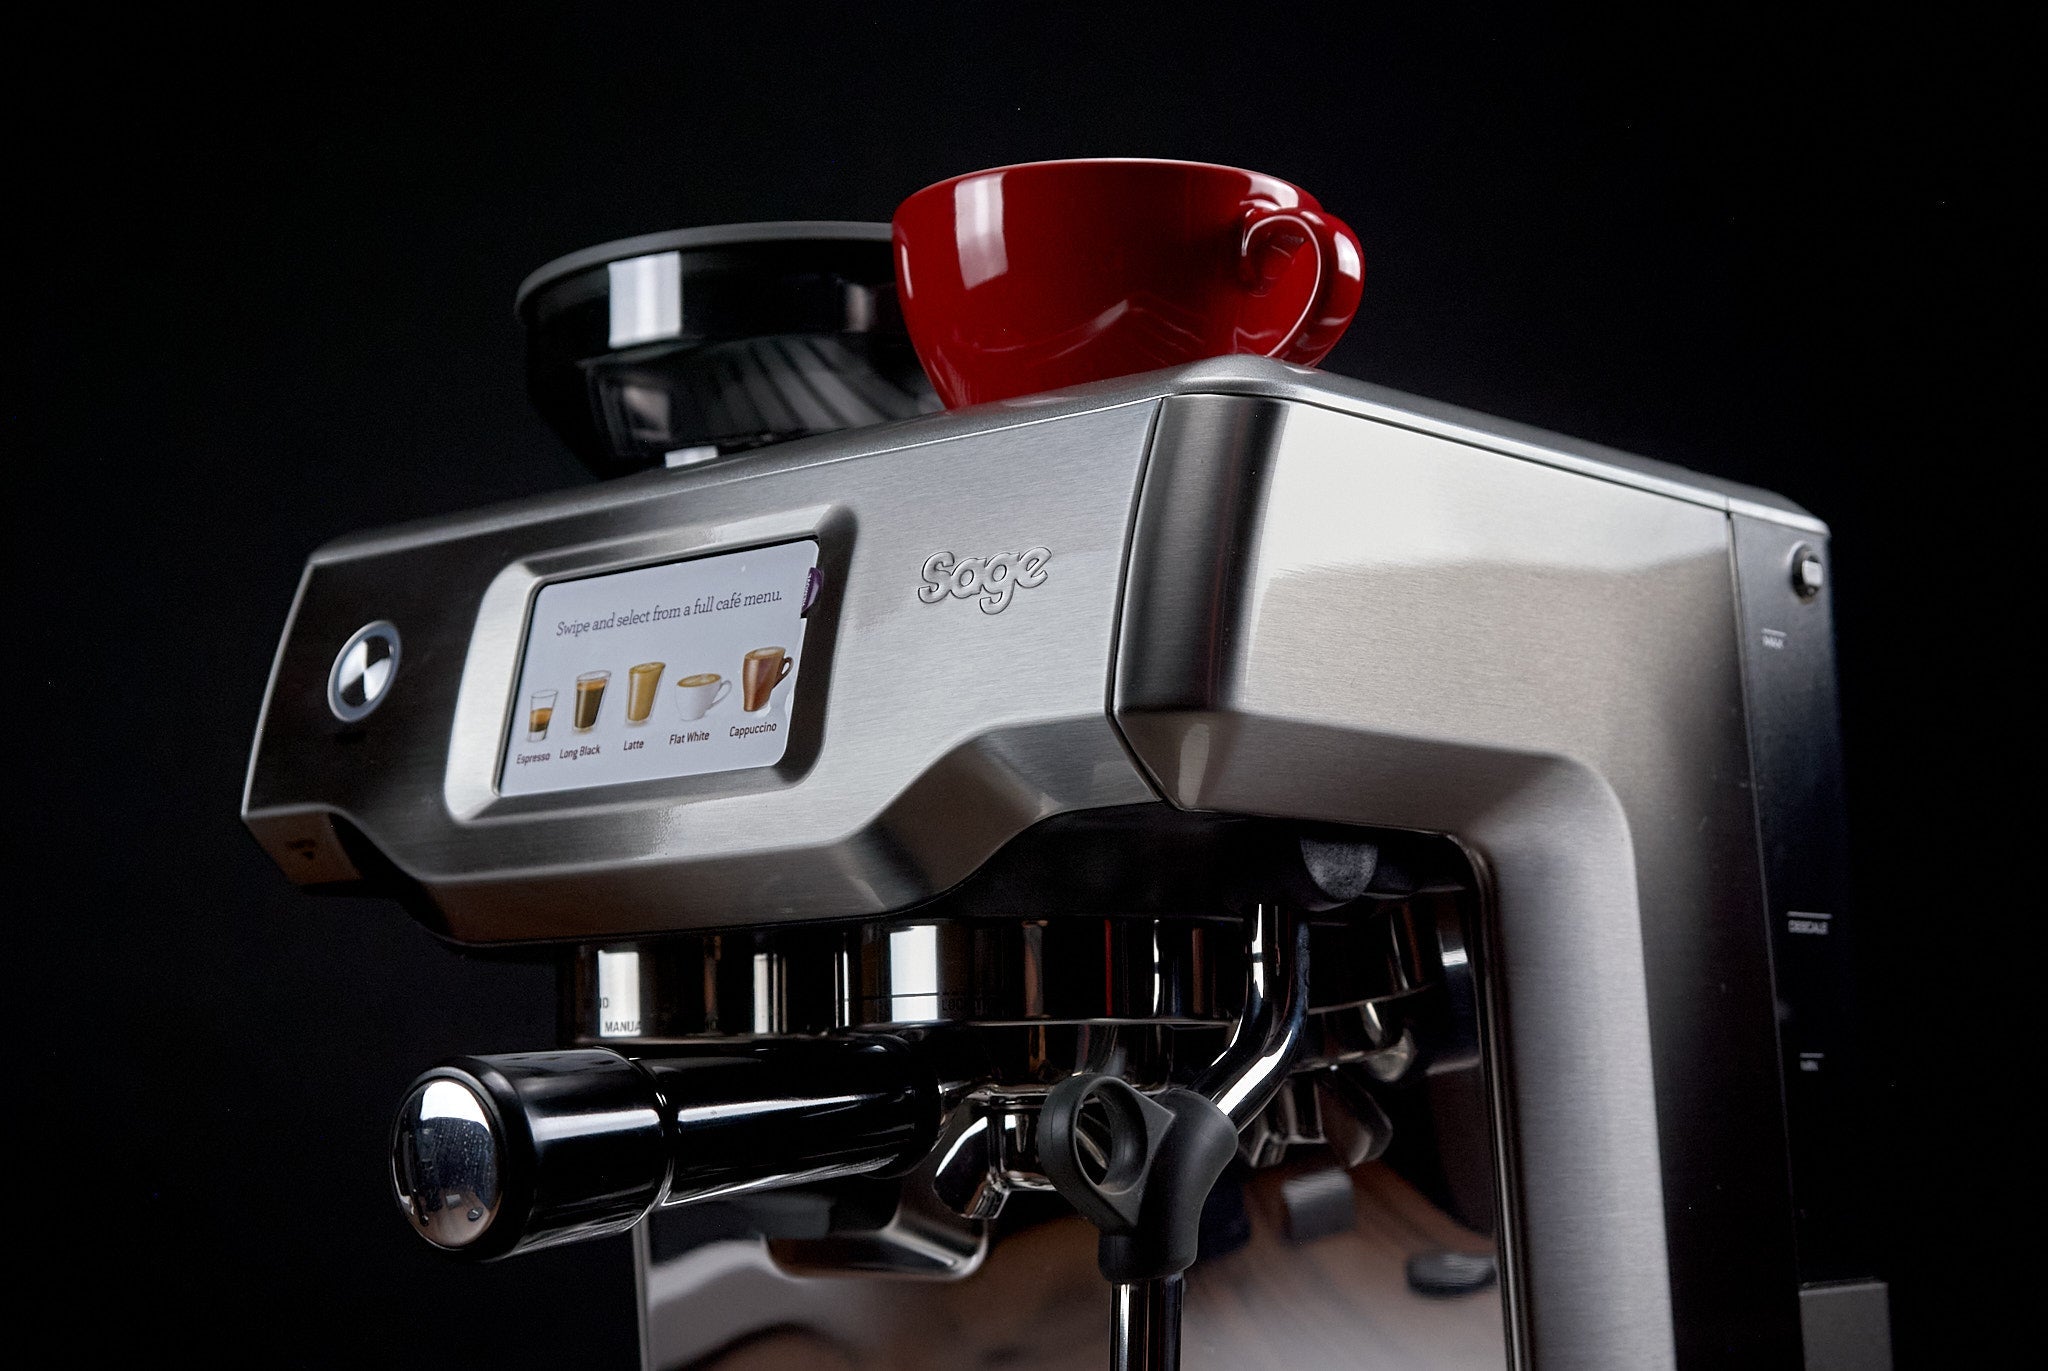 Cafetera Espresso Molinillo Barista Touch Sage SES881BSS4FEU1 - Outlet  Exclusivo